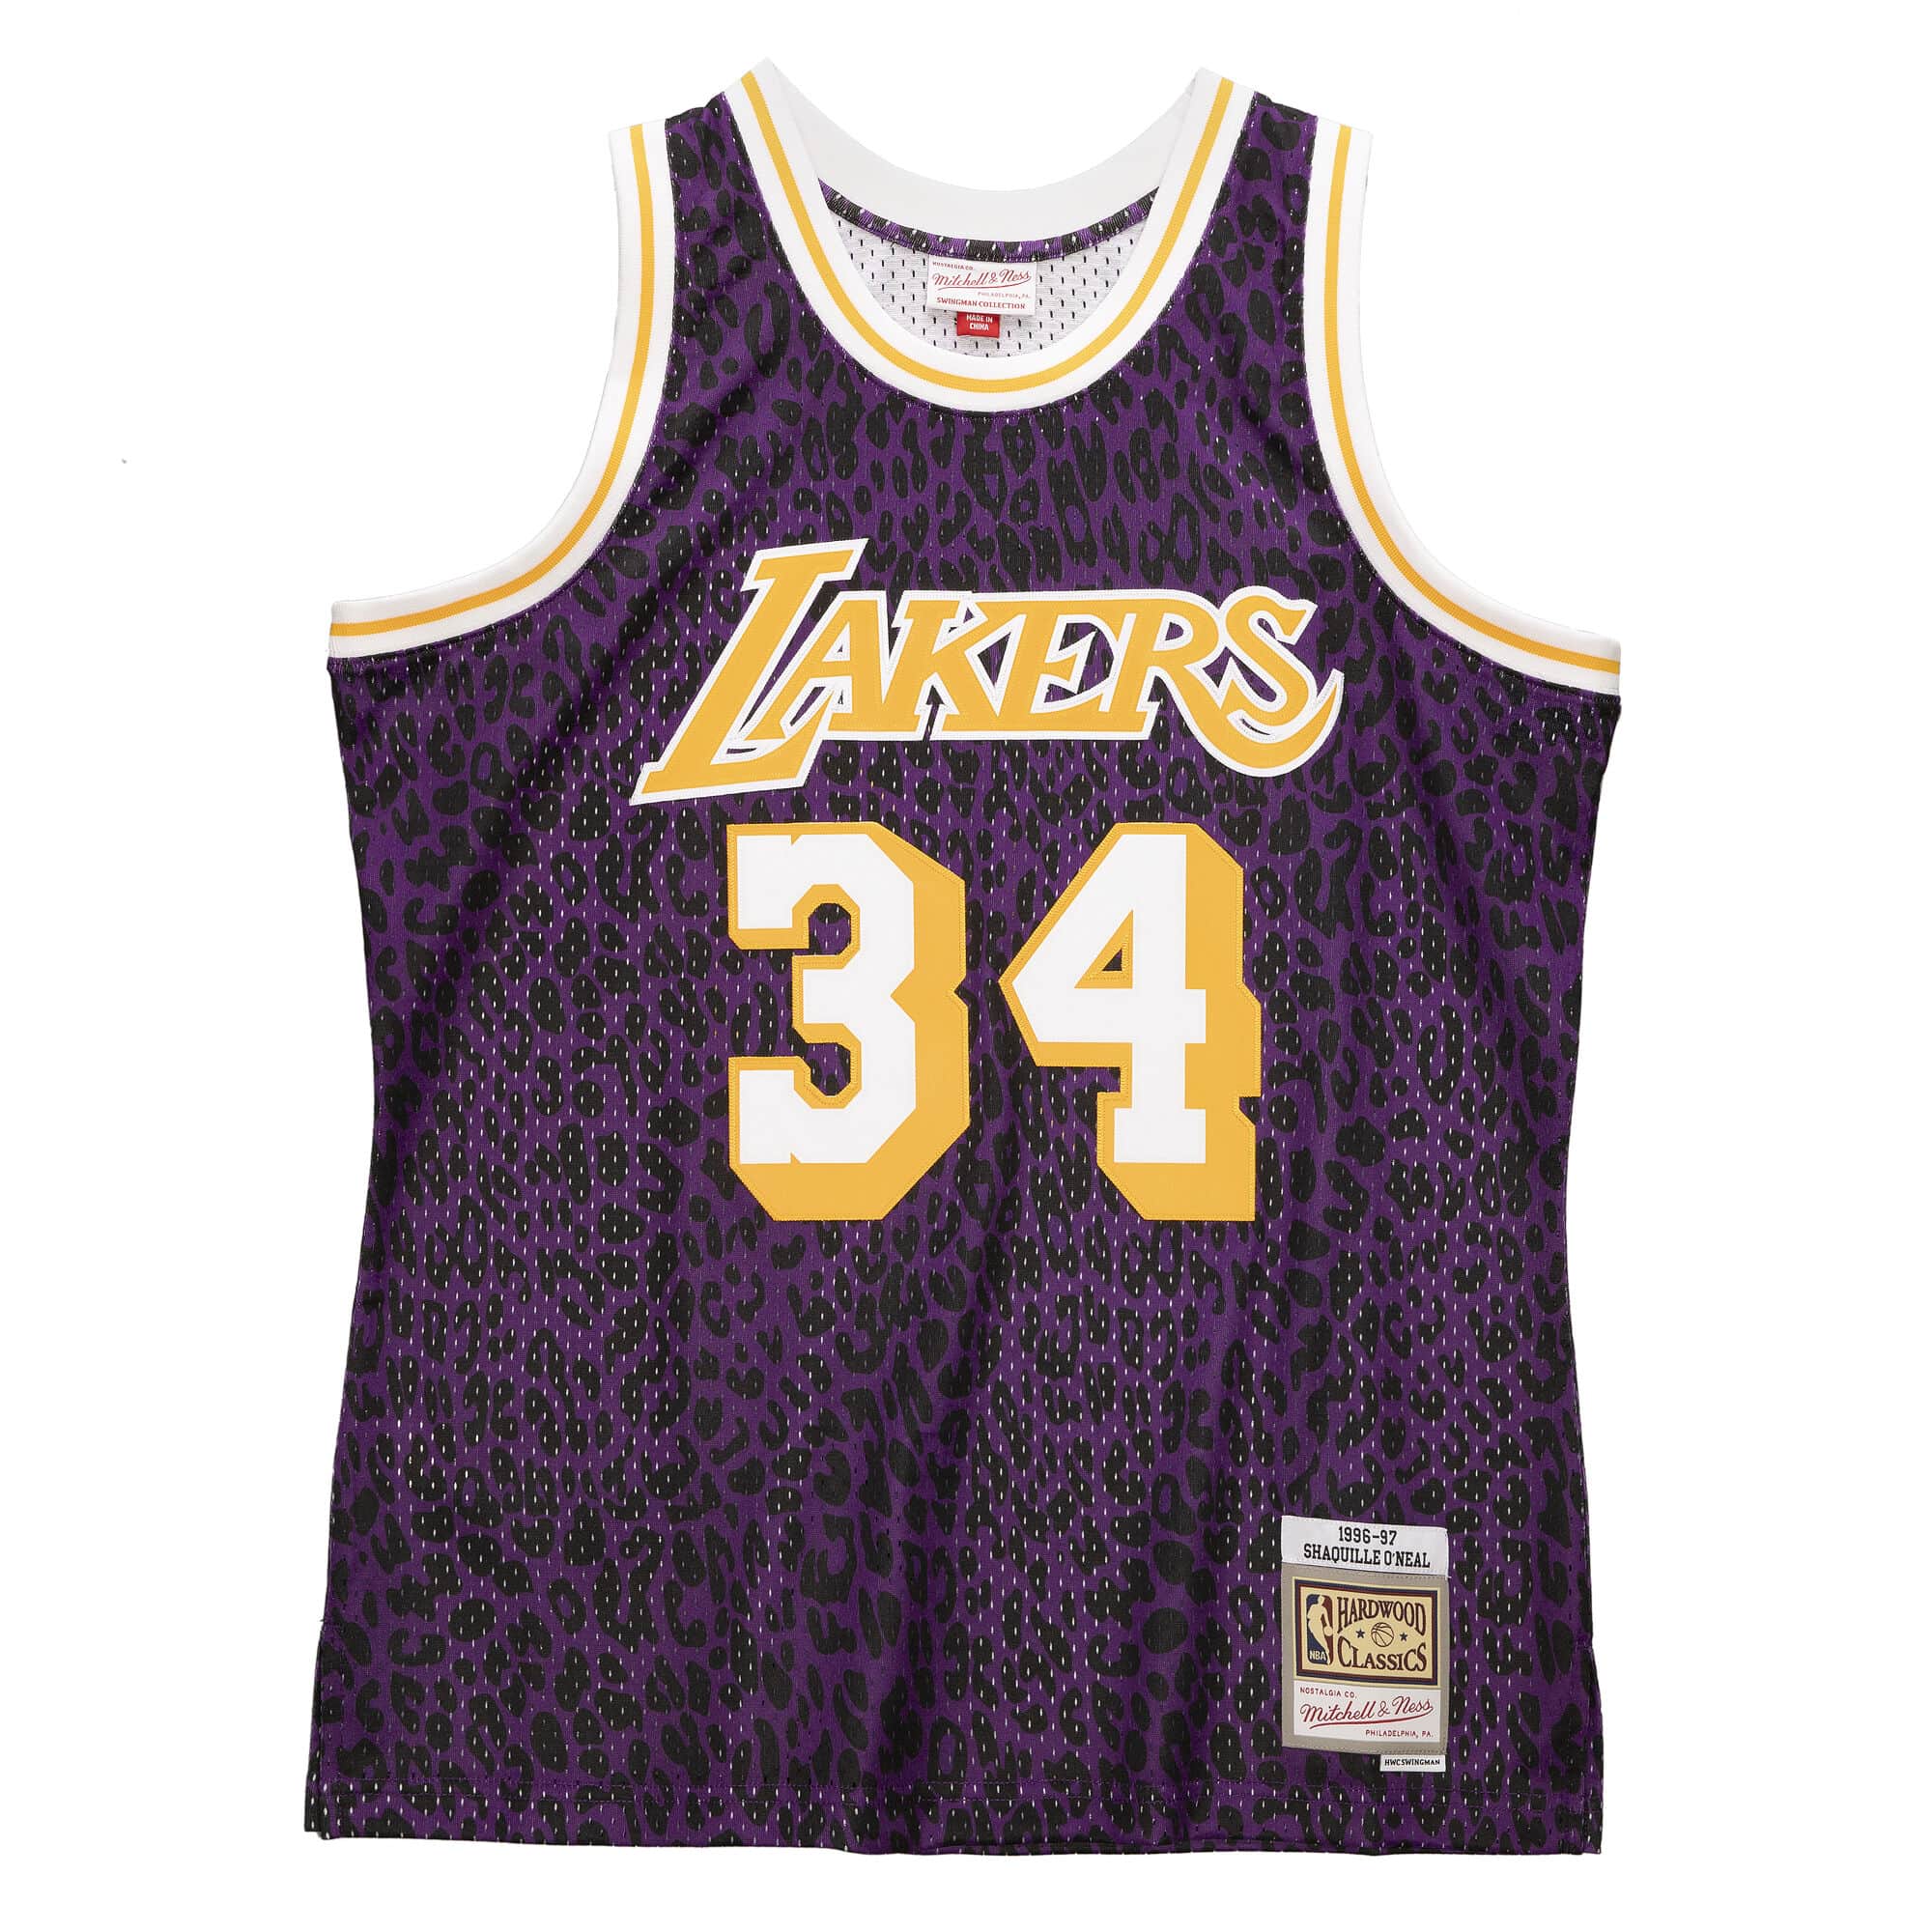 Colector menta descuento Mitchell & Ness NBA Los Angeles Lakers Wildlife Swingman Jersey Purple  Shaquille O'Neal '96 - adidas adp6089 boots girls shoes size - 97 –  HotelomegaShops